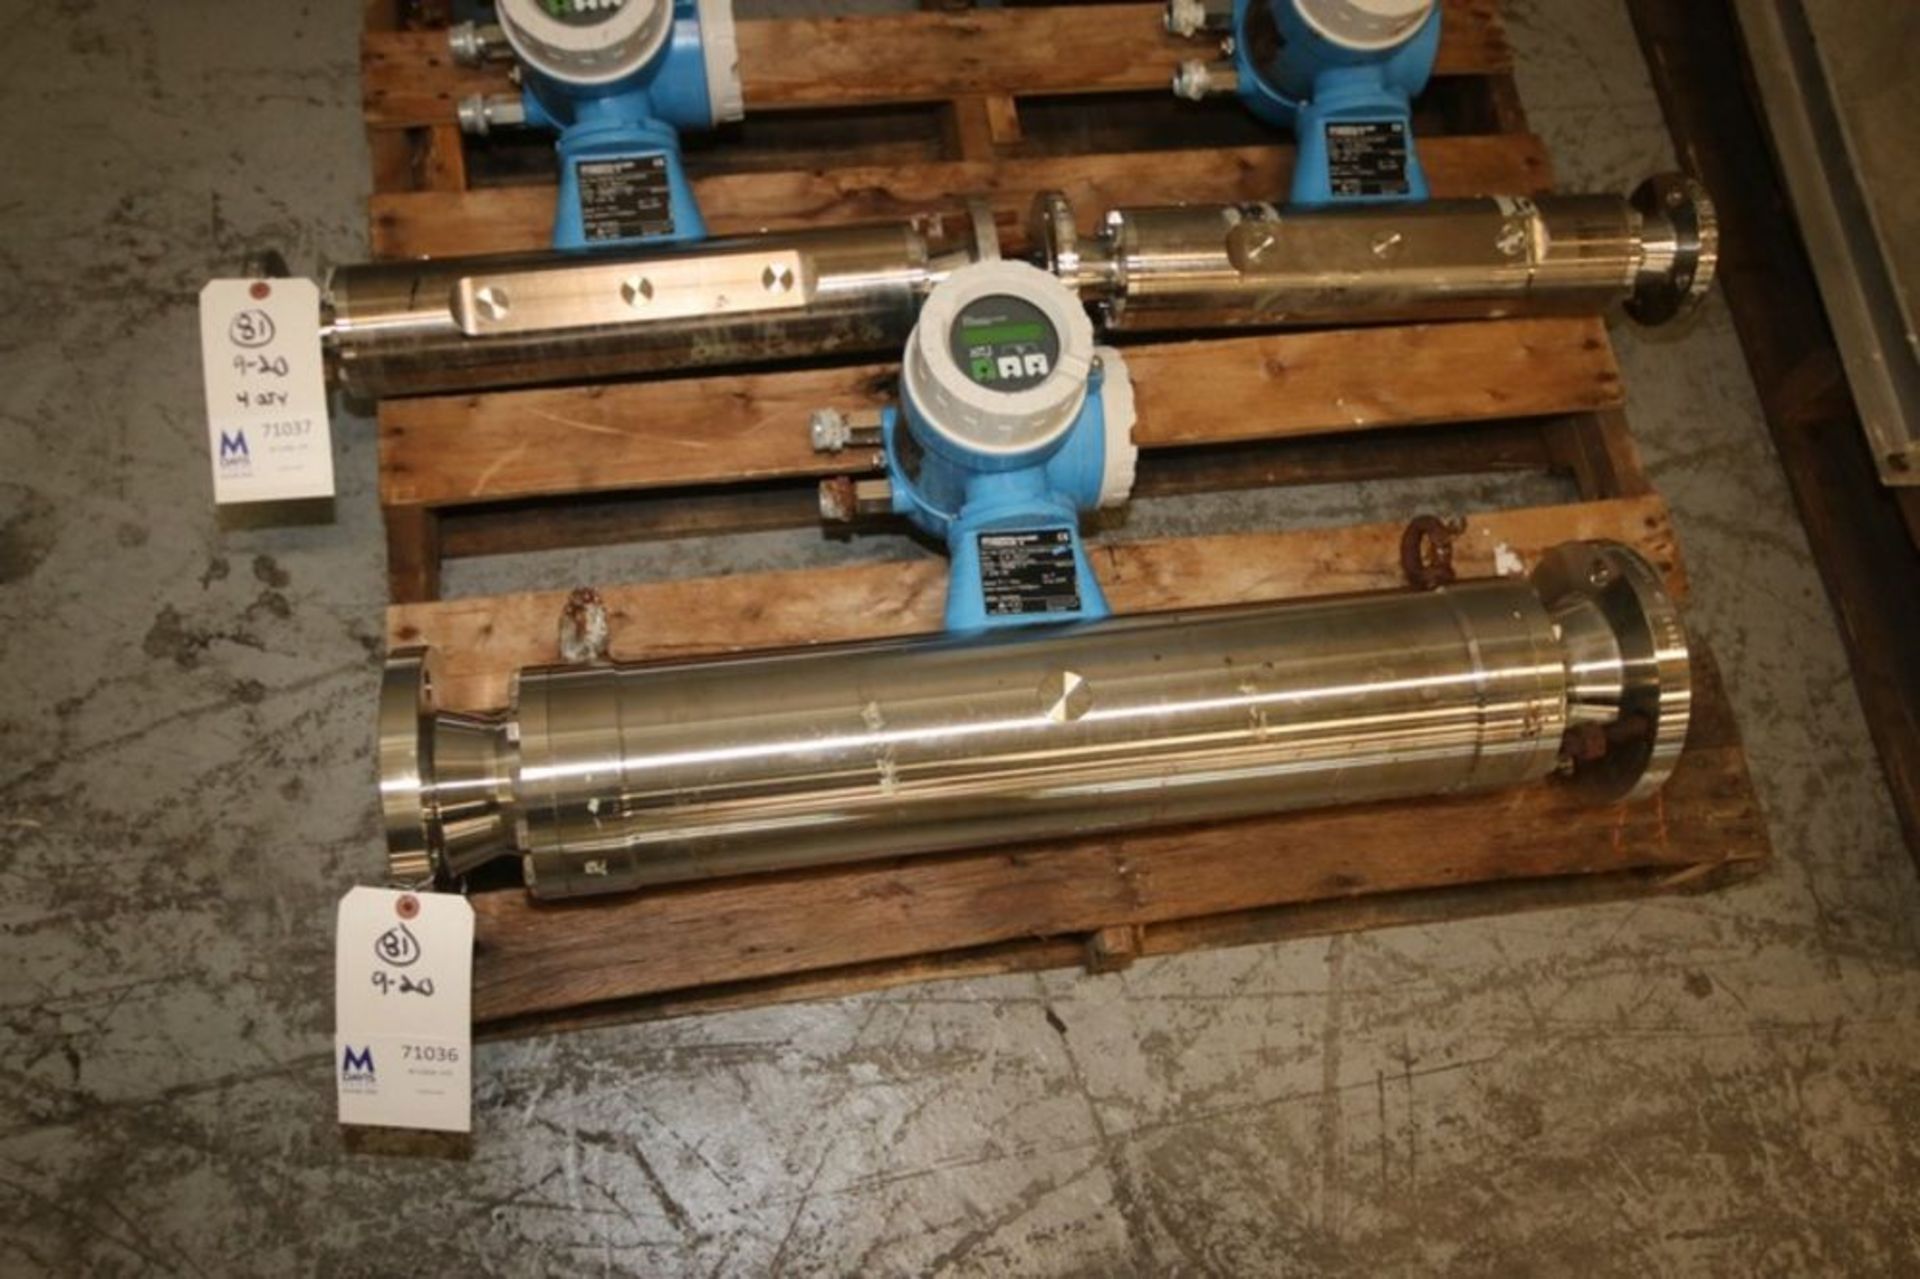 Endress+Hauser S/S Flow Meter, Order Code: 63MT80-SAA00A25B1W, S/N G 6F 850447, with 3" Bolt Type - Image 2 of 7